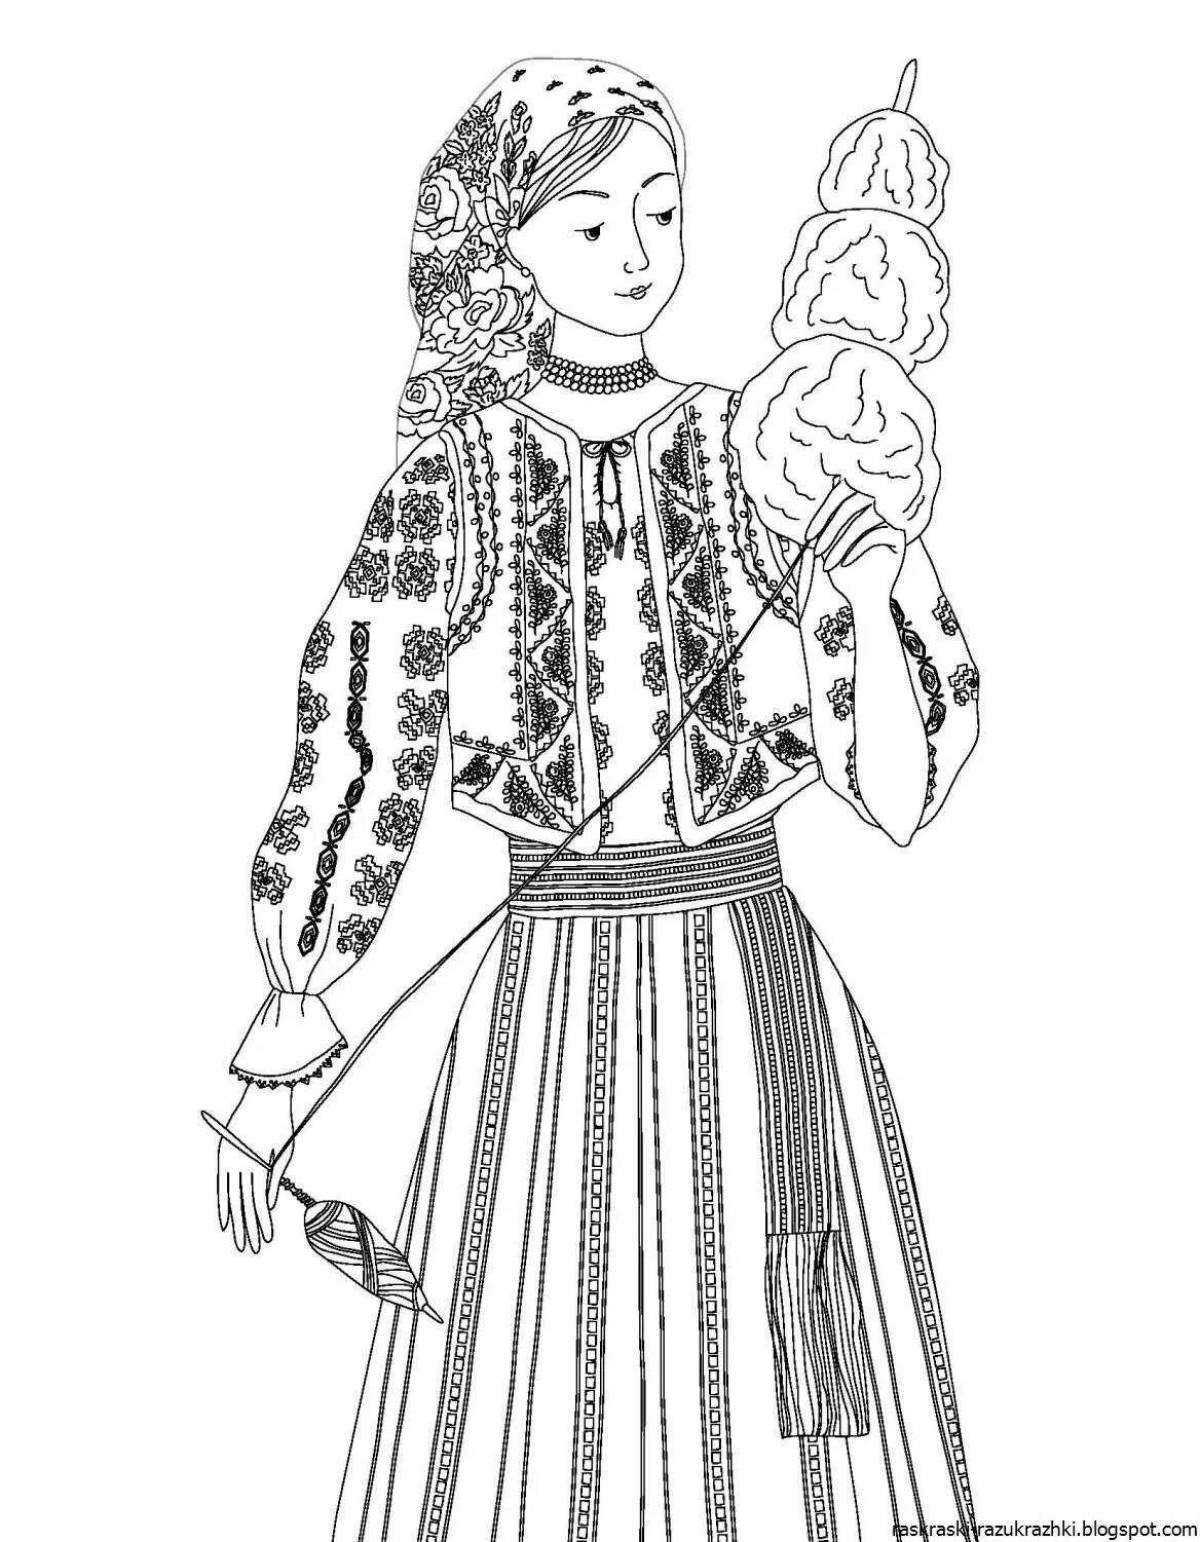 Coloring page cheerful Tula folk costume